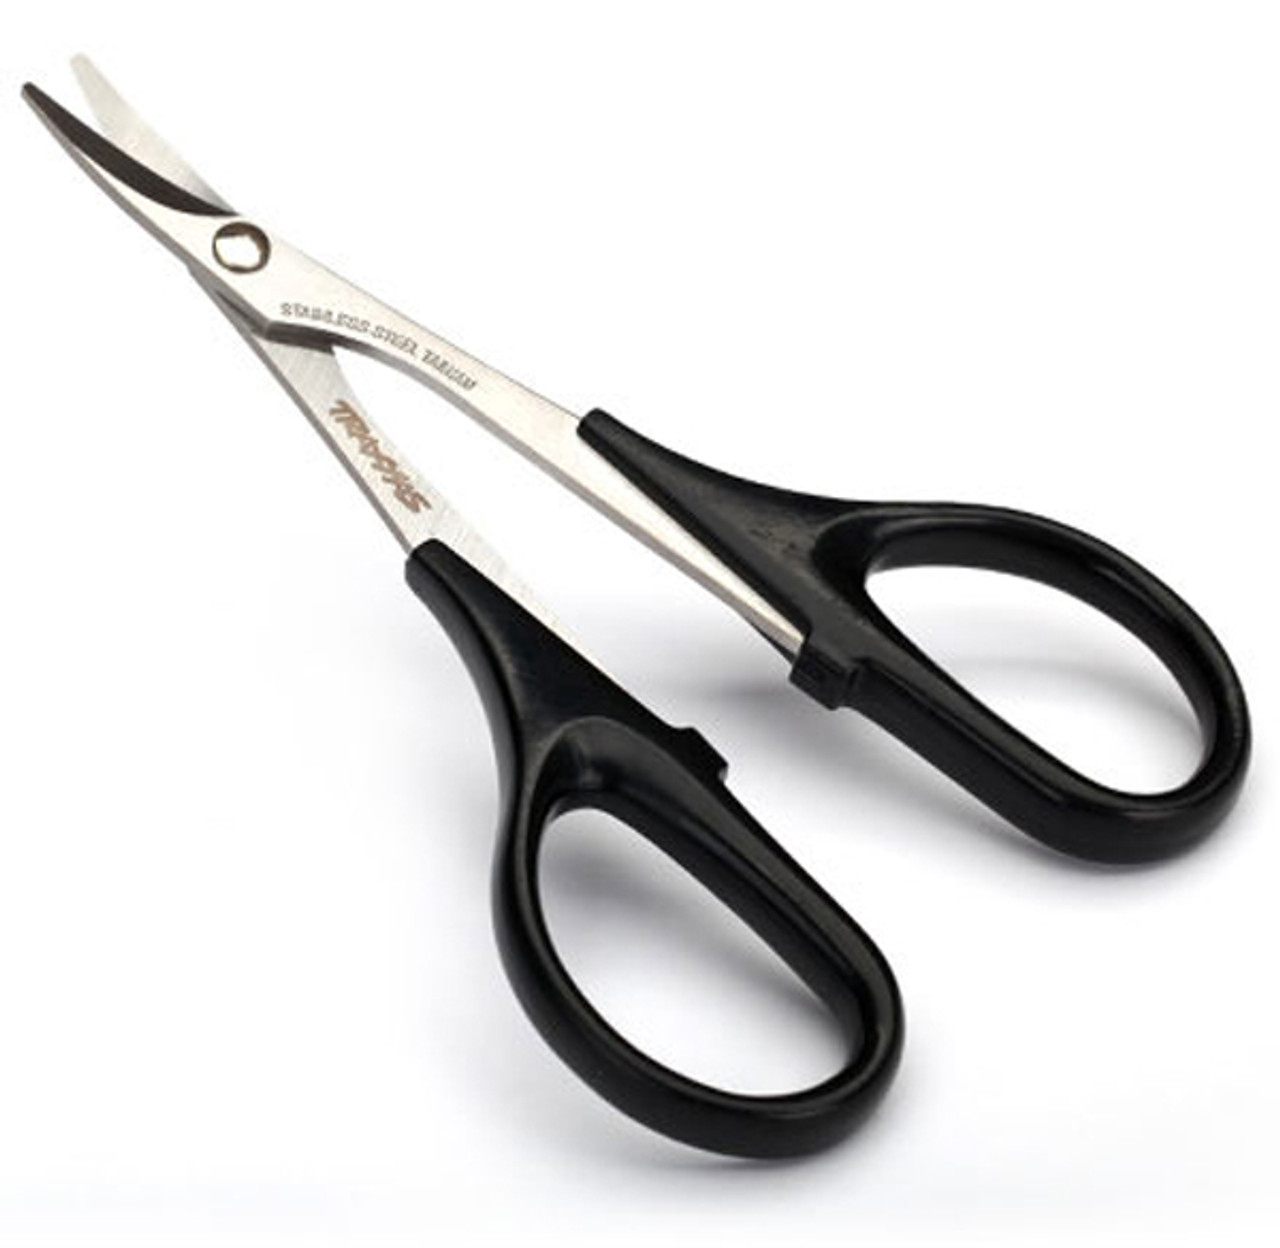 Traxxas 3432 Scissors, Curved Tip